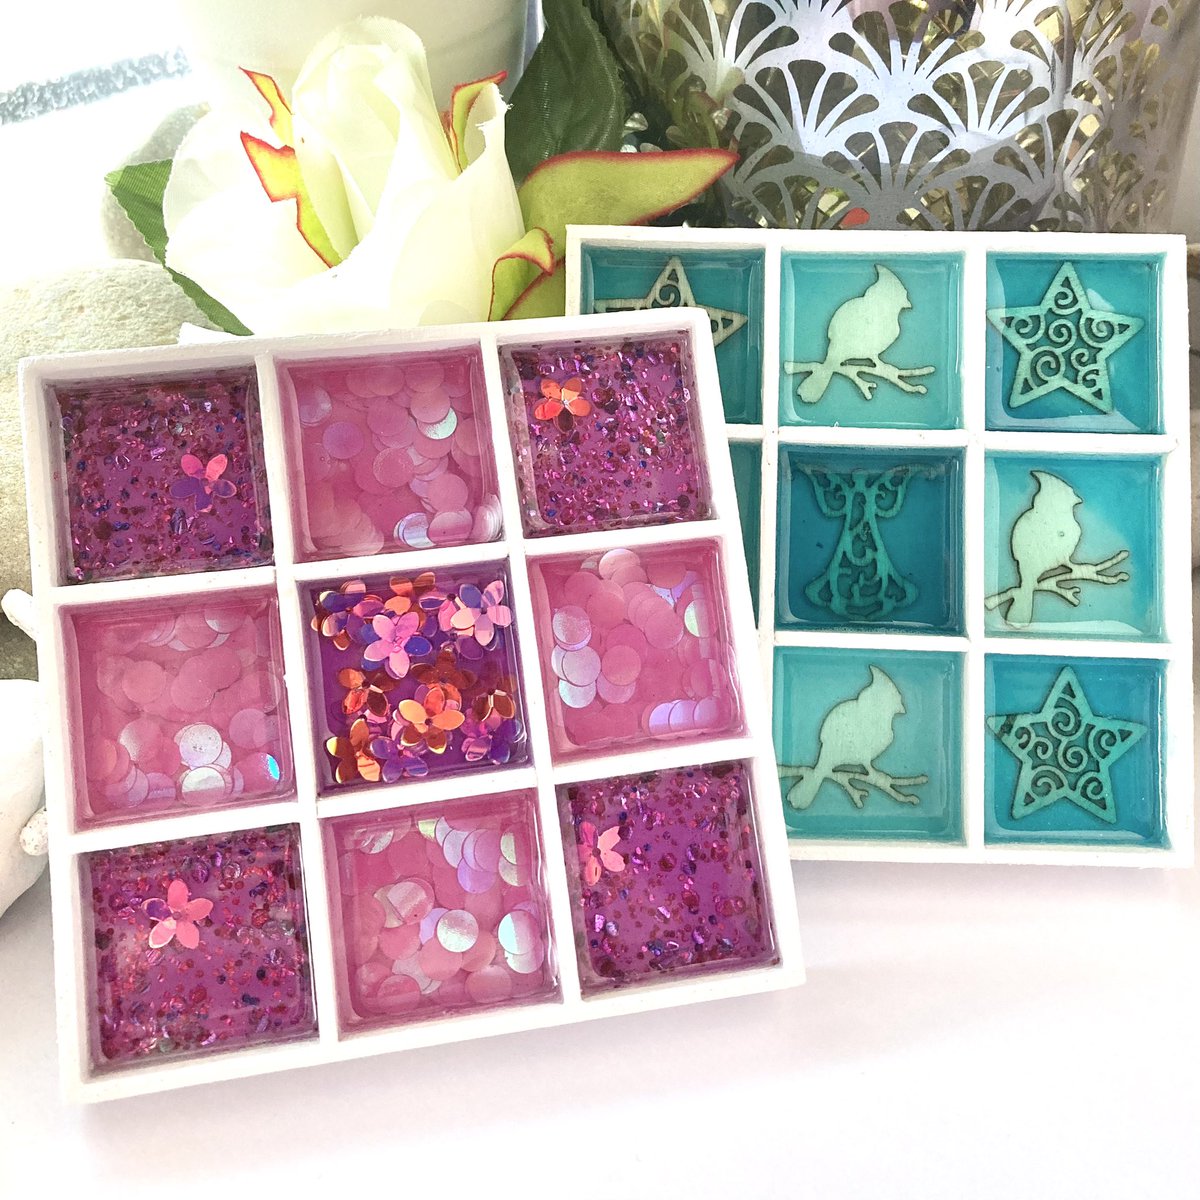 Morning, there back, resin wood ring trays, in a choice of 2 designs, sparkly pink or blue with wood embellishments. Perfect for jewellery or can be used as a pill box: etsy.me/3JOnWn0 #UKGiftHour #ukgiftam #shopindie #ukgifthourpower #onlinecraft #mhhsbd #onthisdaygifts